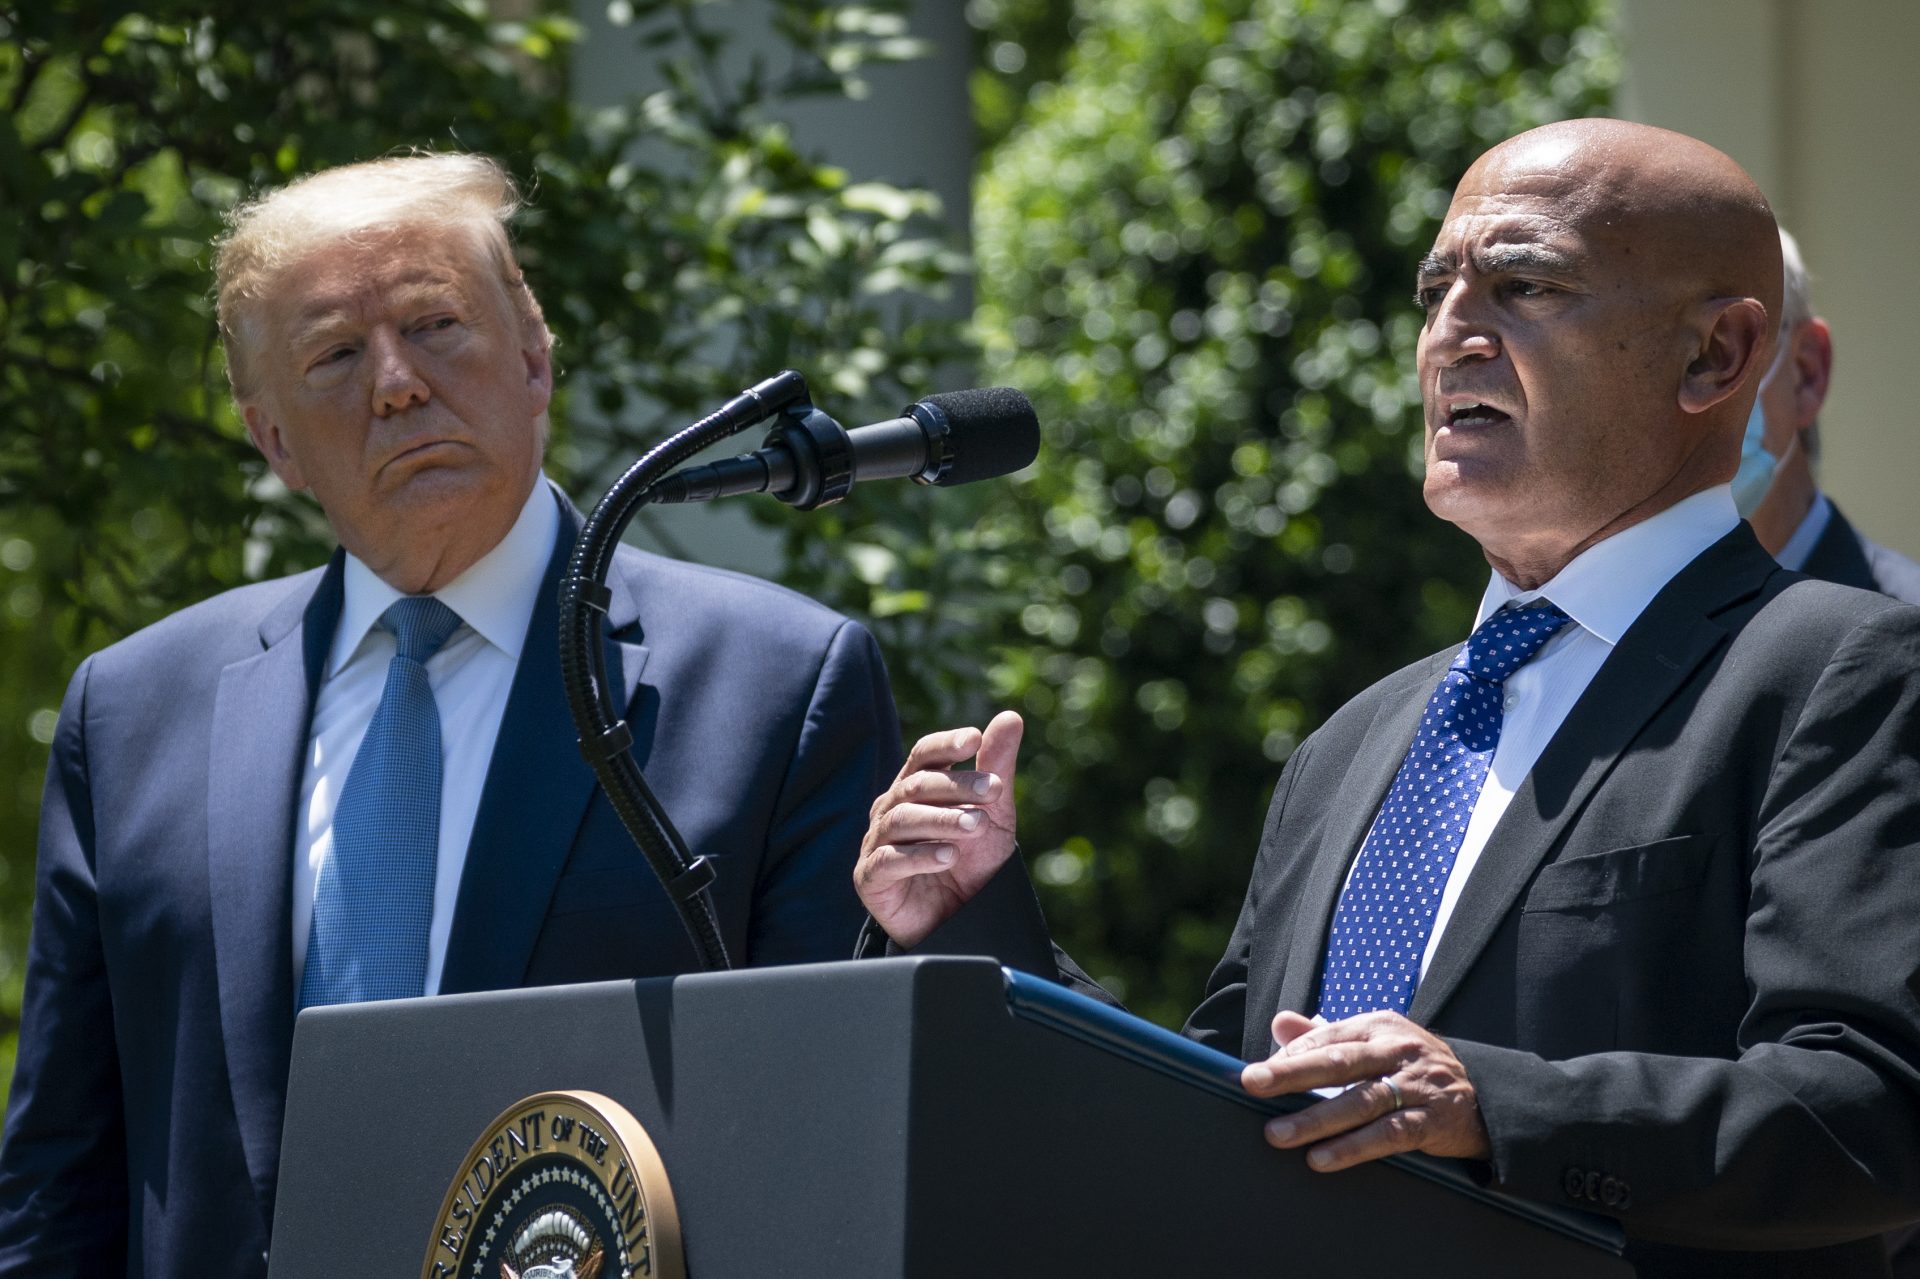 President Trump listens as Moncef Slaoui, the former head of GlaxoSmithKlines vaccines division, speaks about coronavirus vaccine development on May 15.